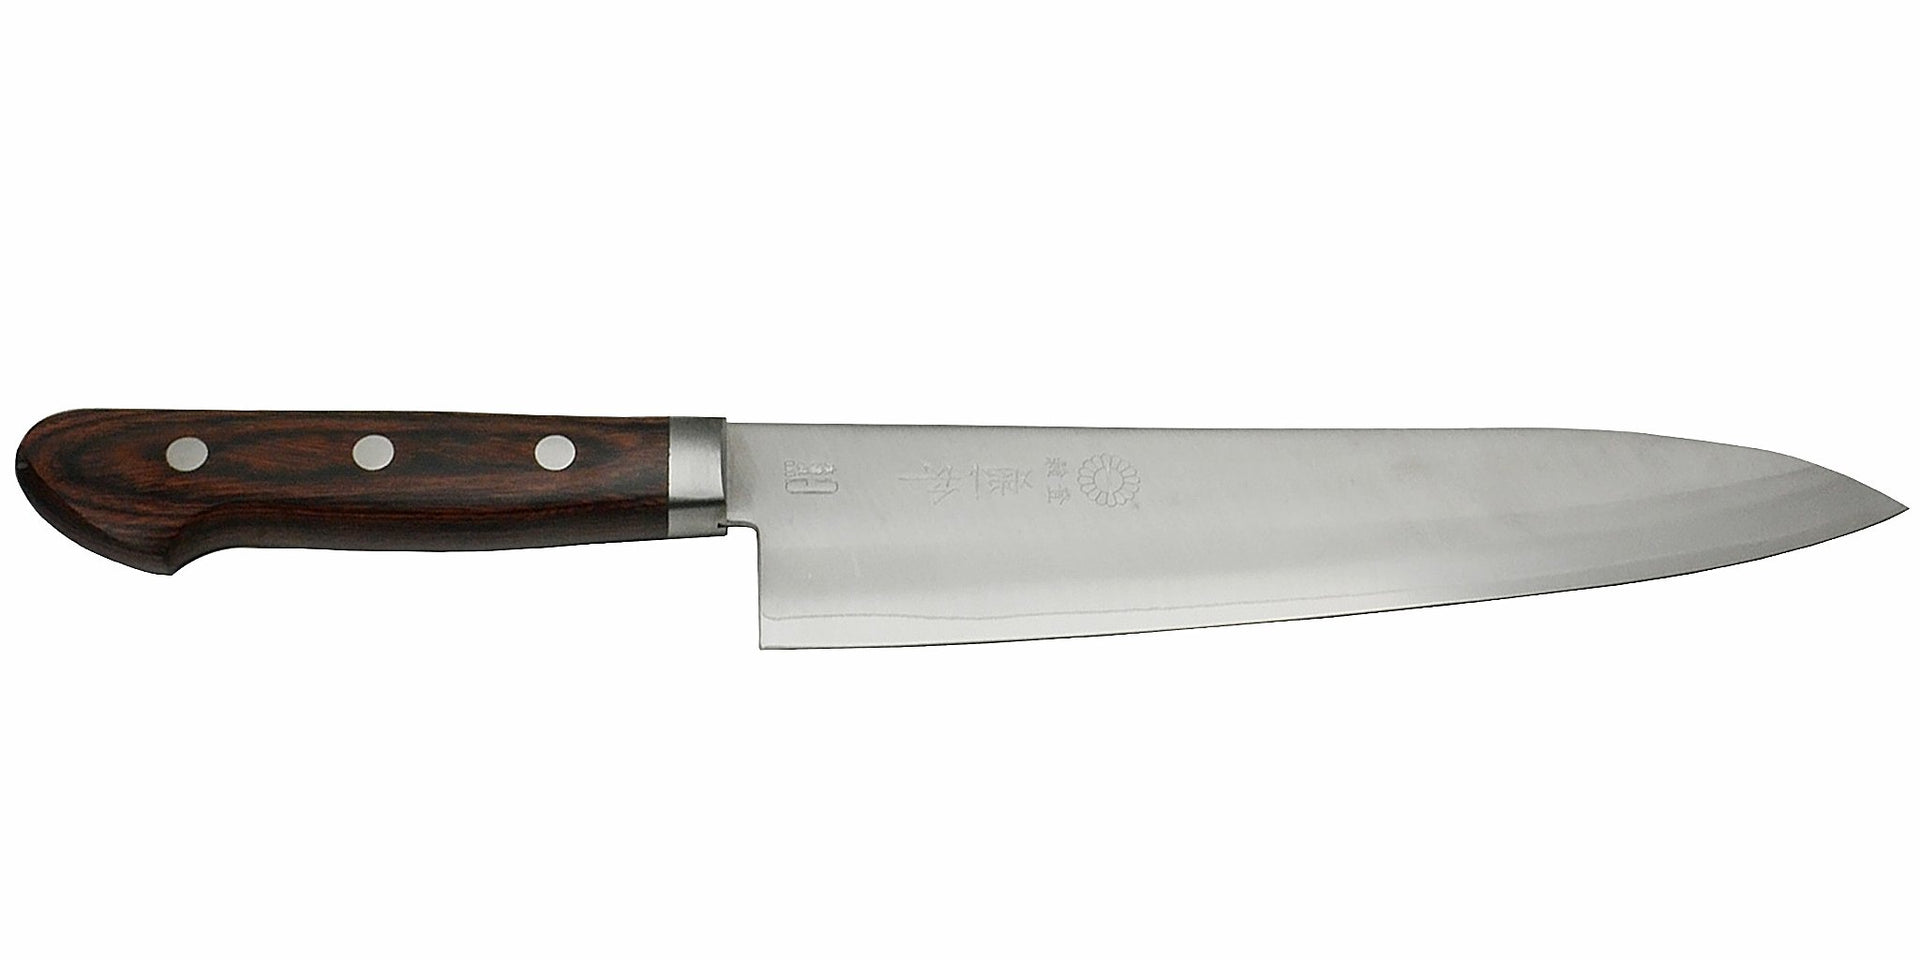 Kikuichi Cutlery went from Samurai swords to kitchen knives